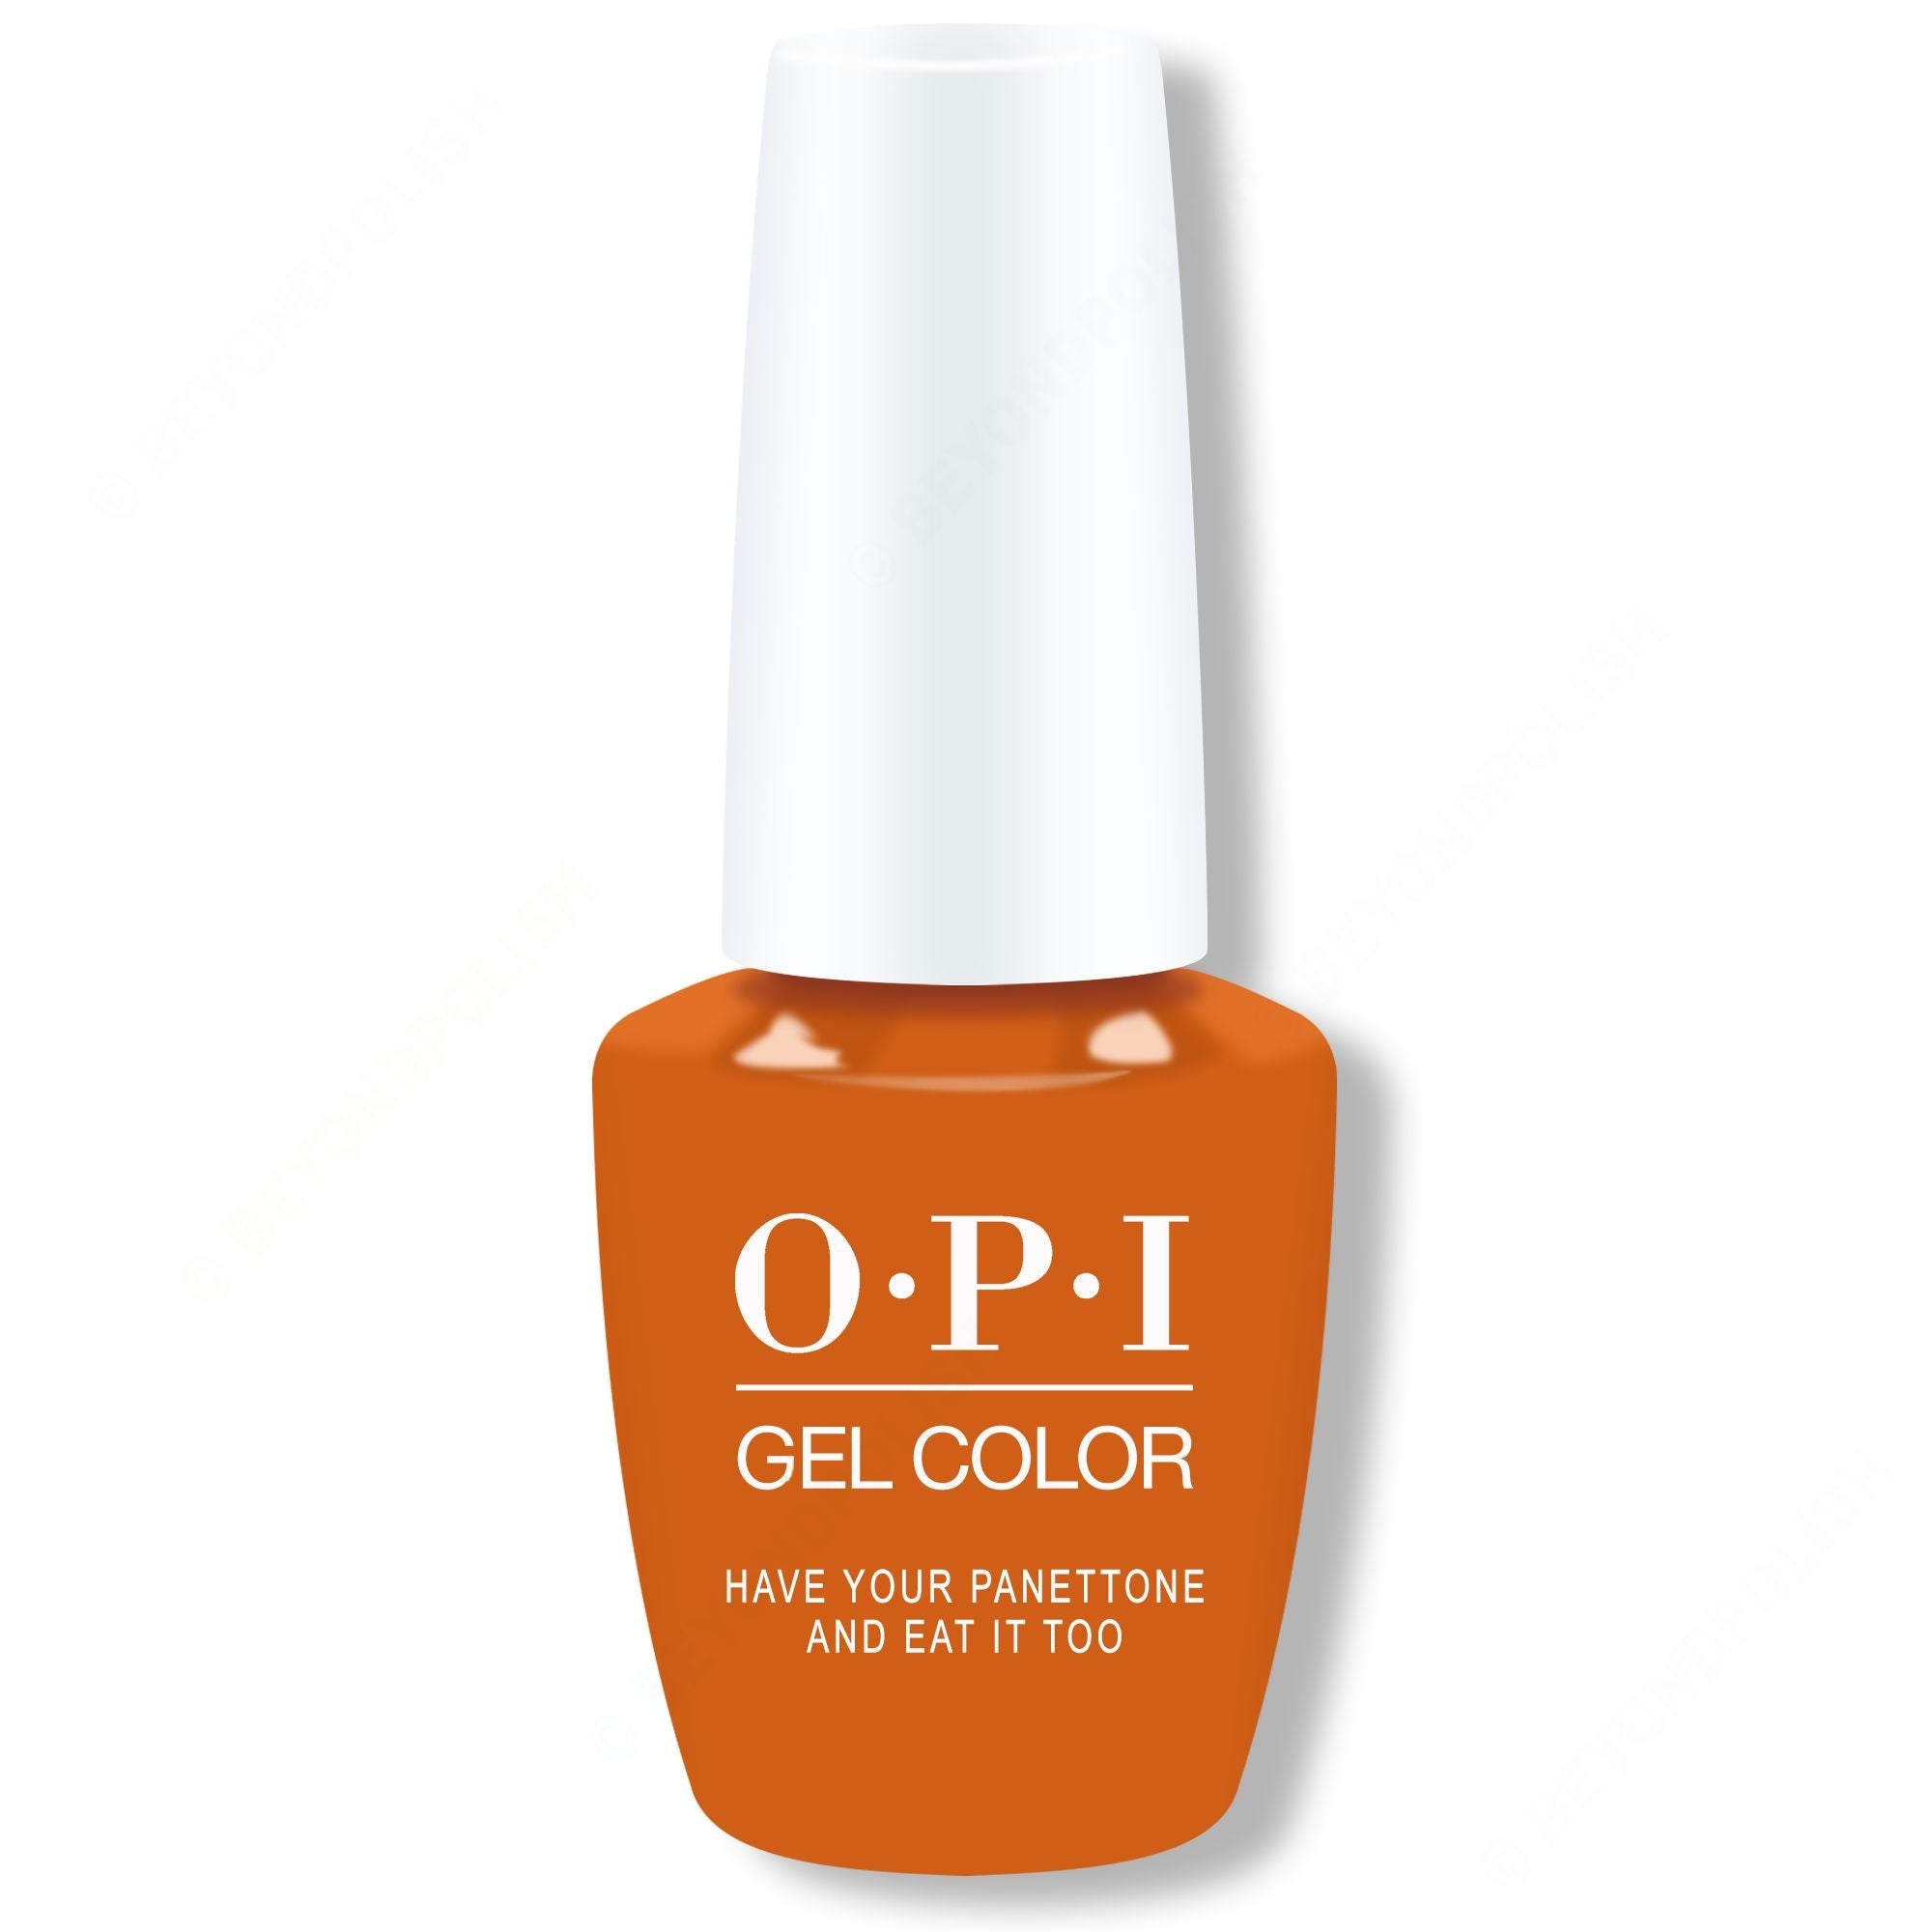 OPI Gel Color - Have Your Panettone And Eat it Too 0.5 oz - #GCMI02